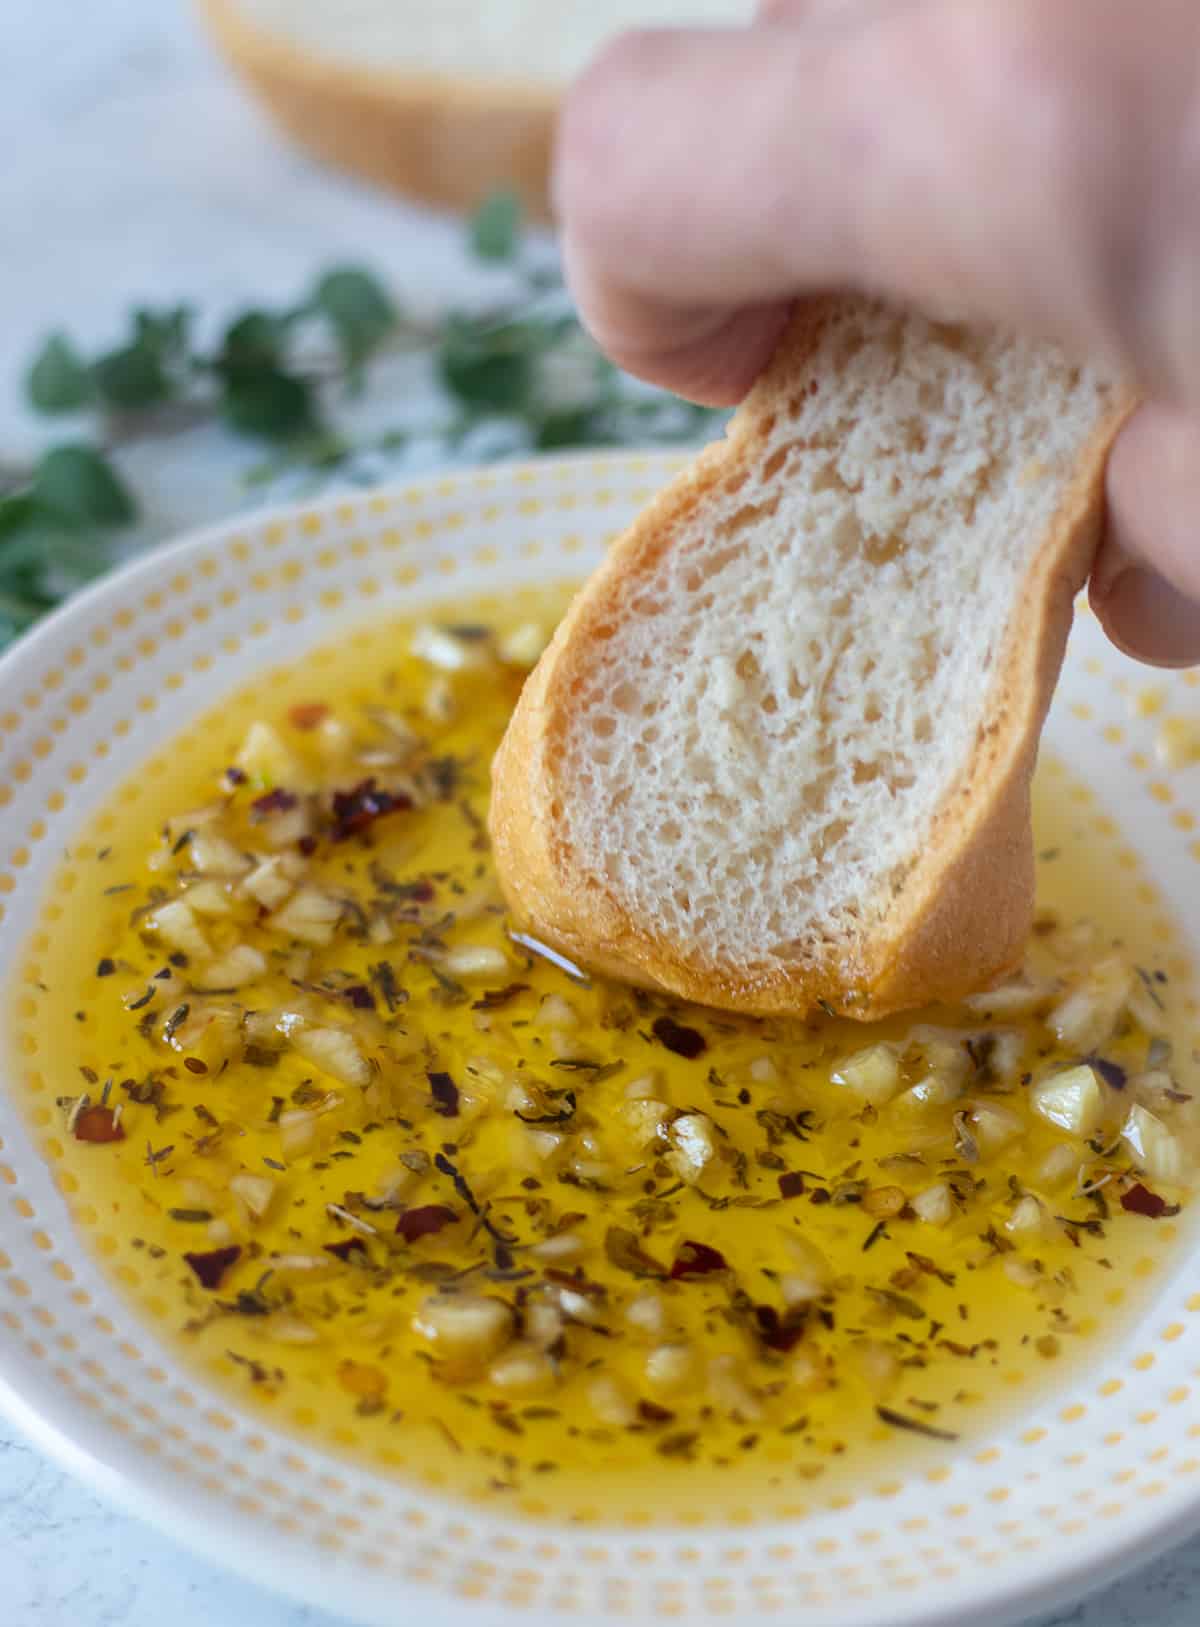 Garlic bread dipping oil on a white and yellow plate with a piece of bread being dunked in the bread oil.